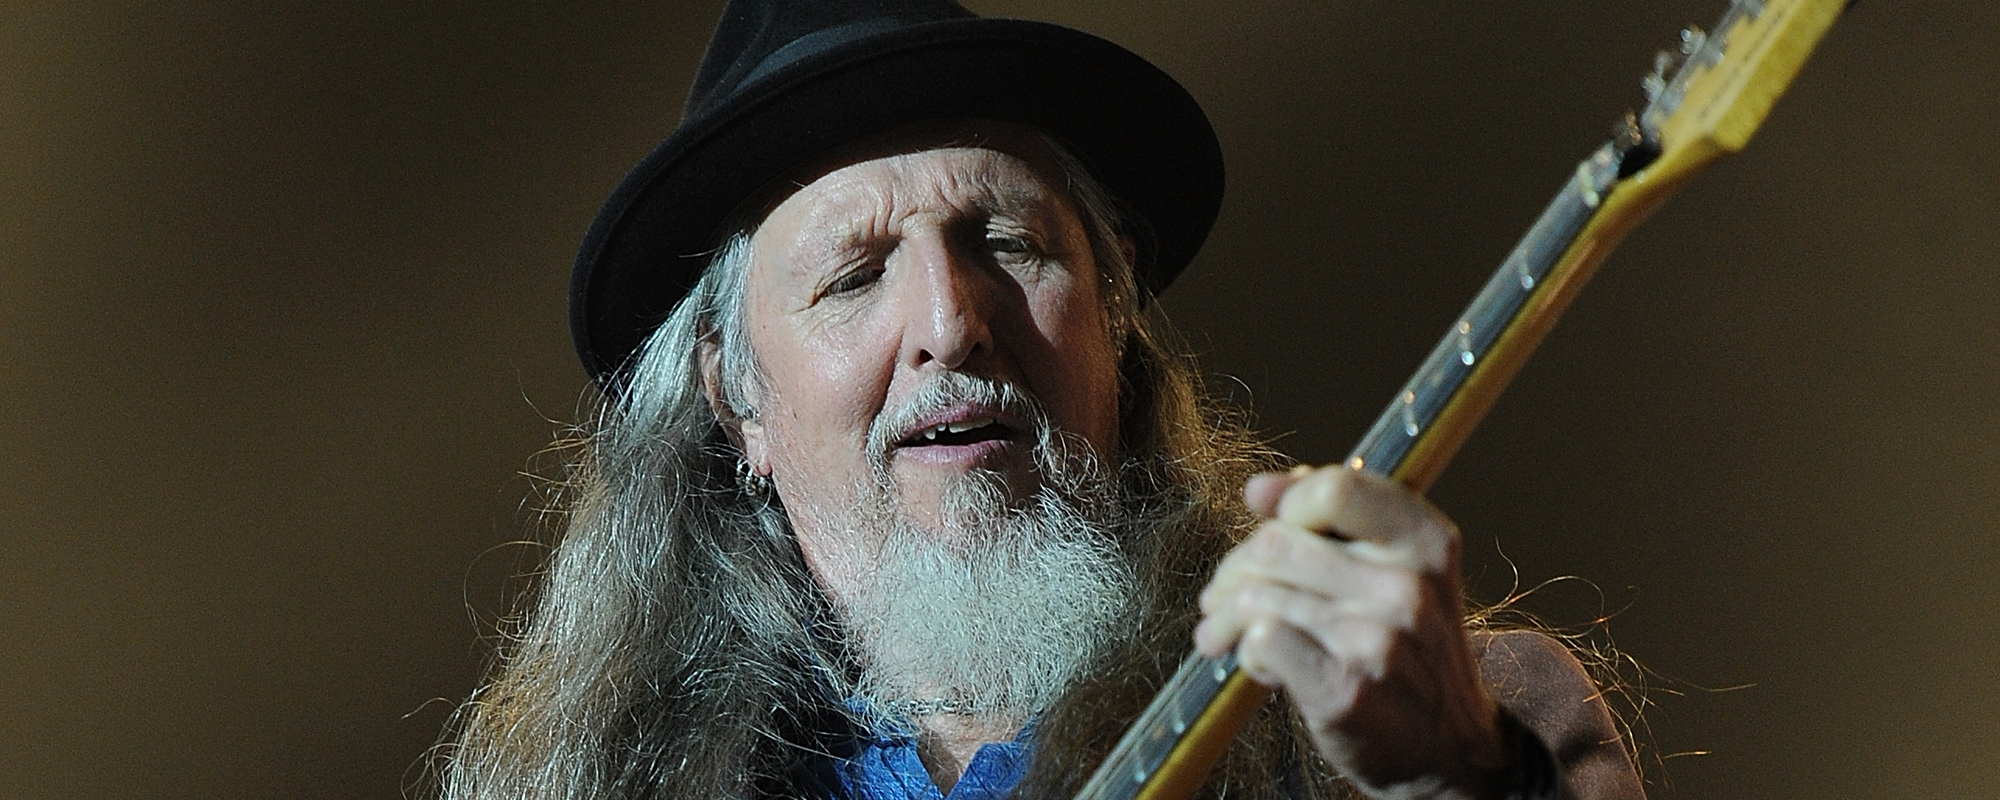 Pat Simmons Gives Update on The Doobie Brothers, Including New Album and Tour